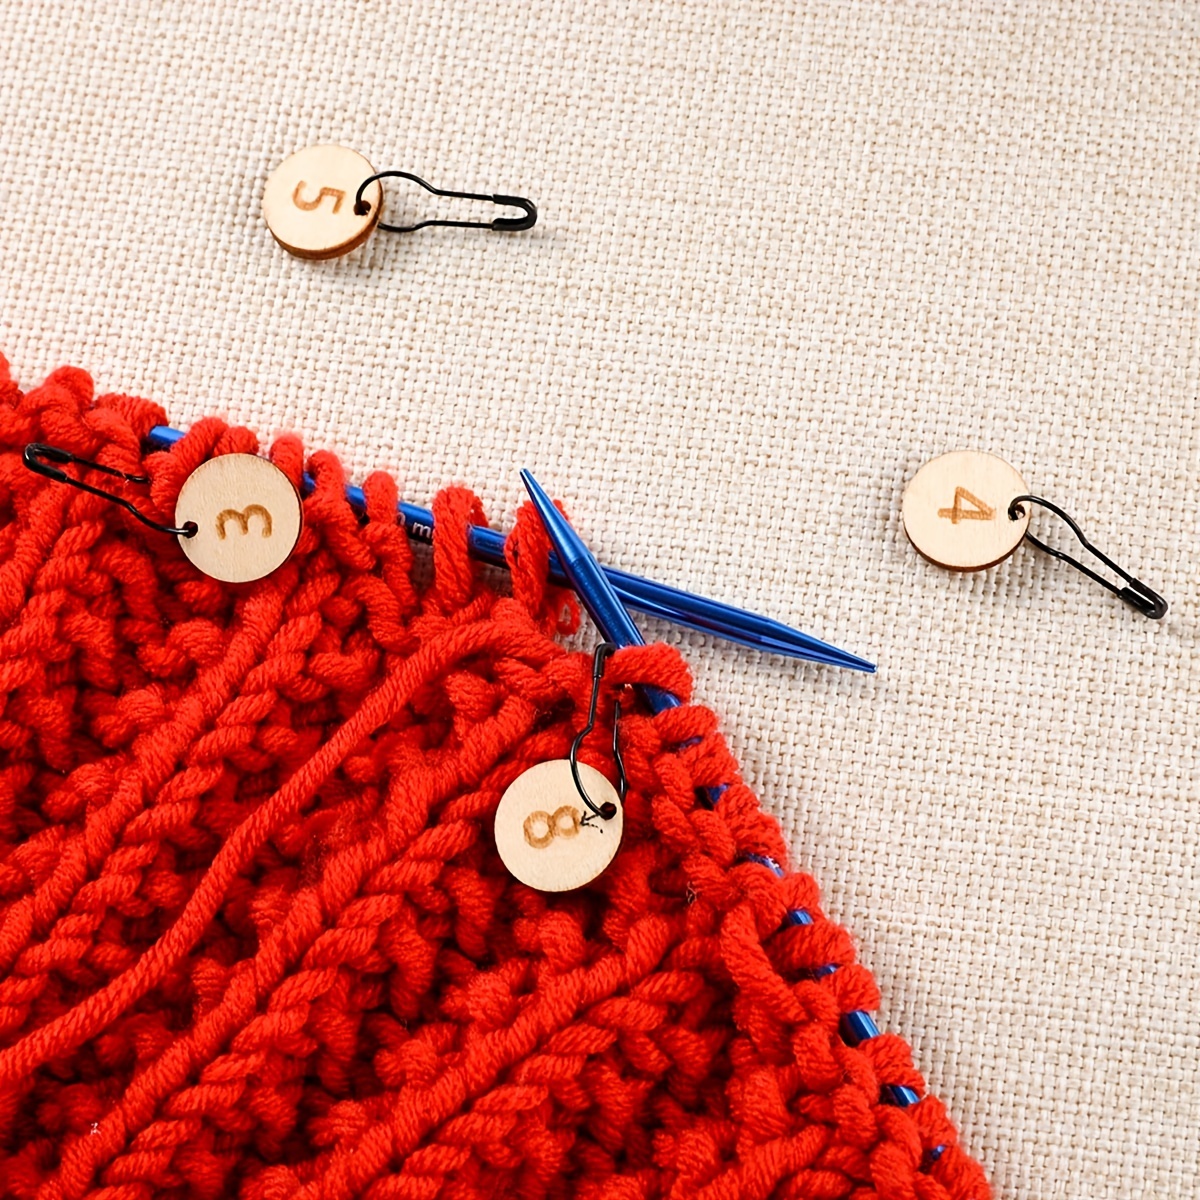 Ideas for Homemade Stitch Markers for Your Knitting Projects